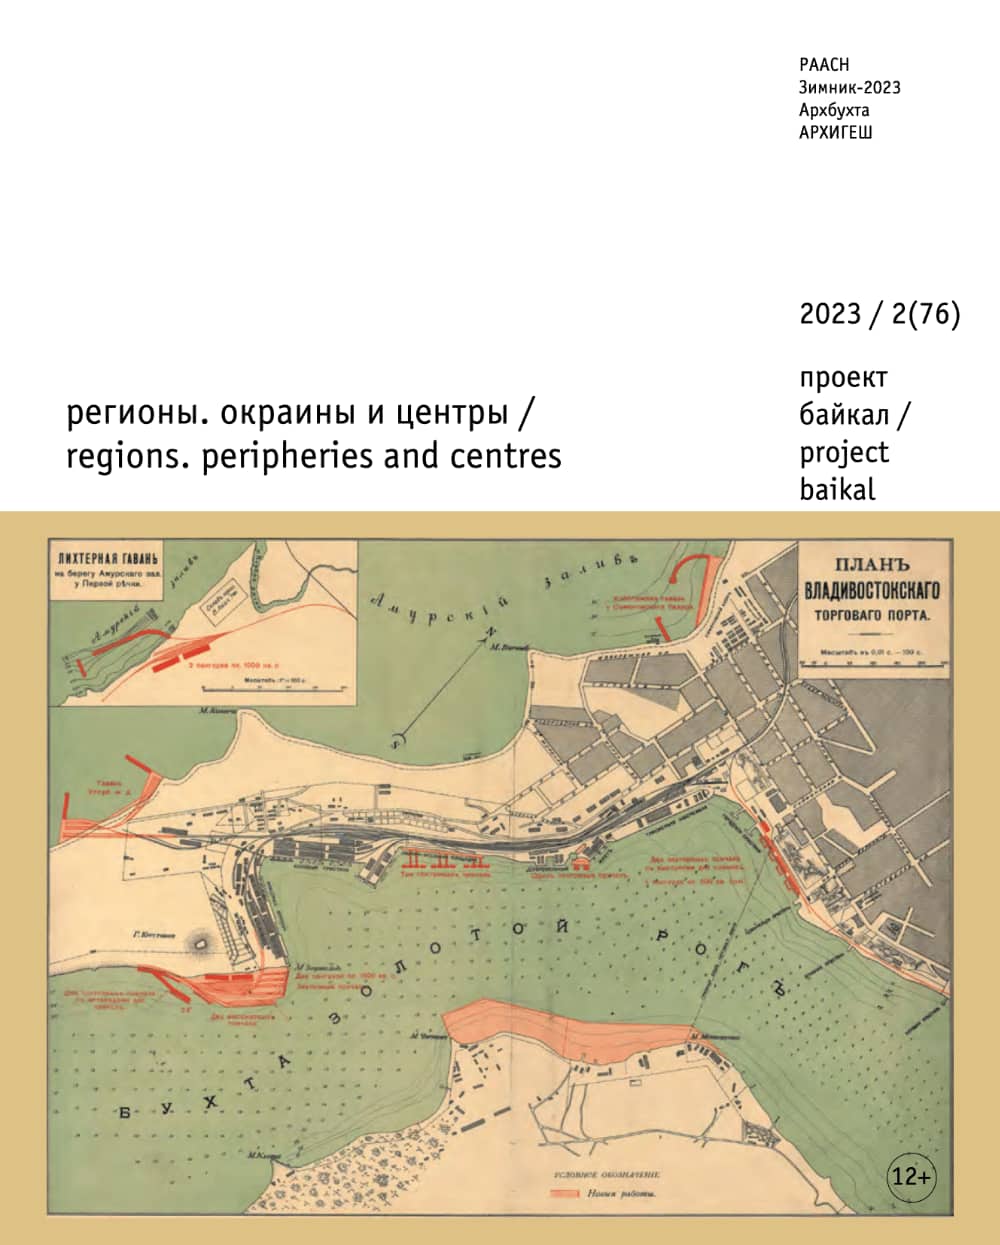 regions. peripheries and centres